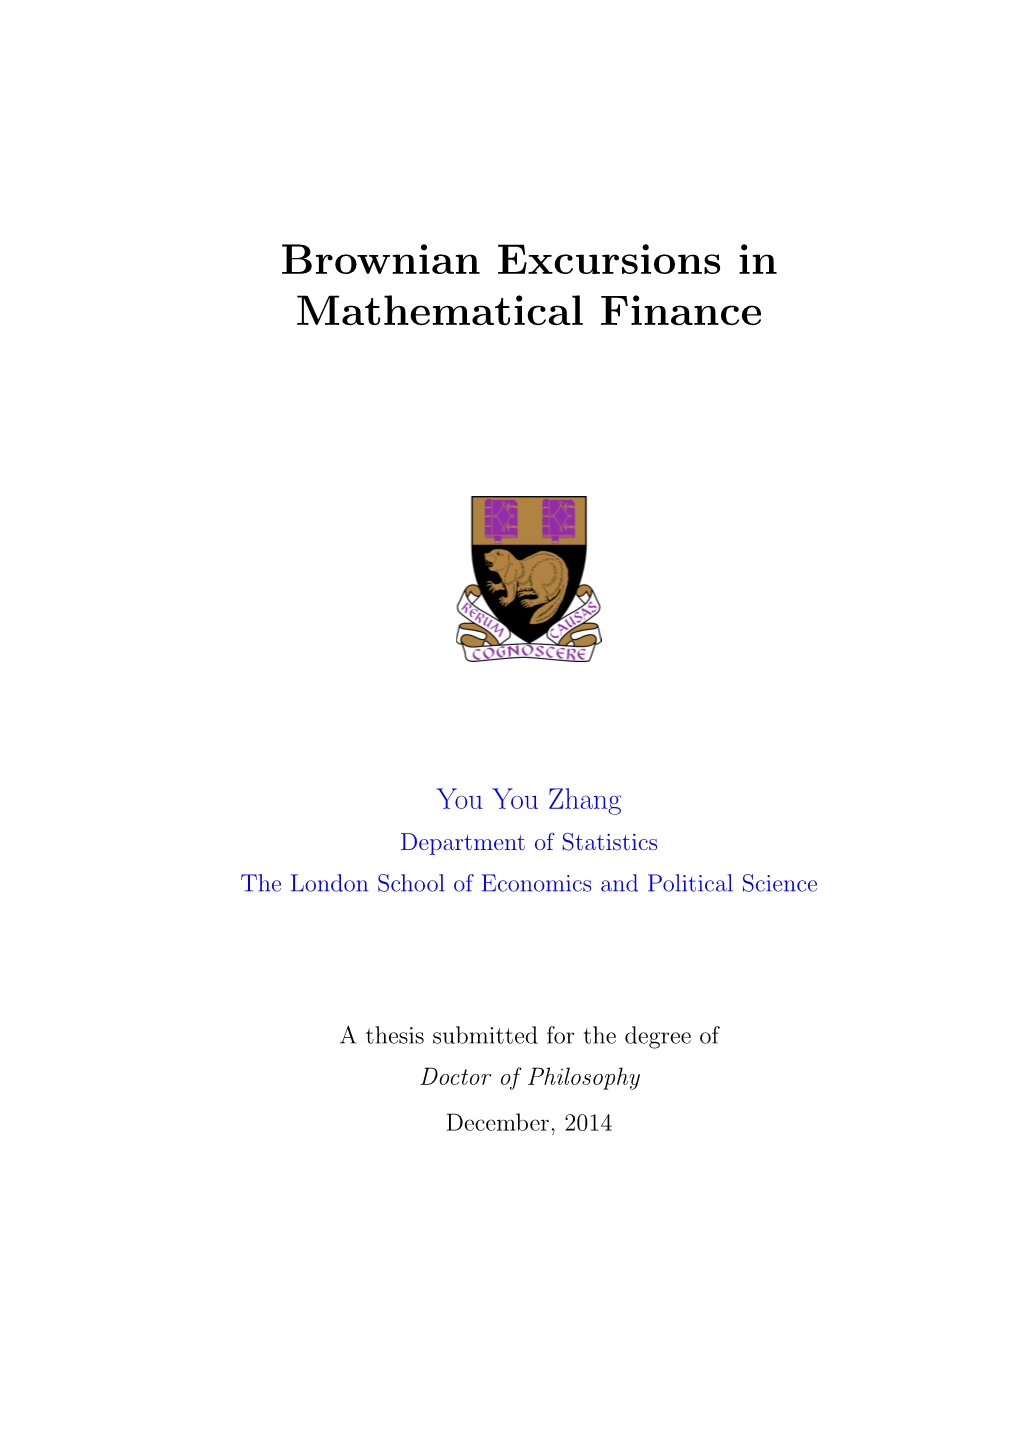 Brownian Excursions in Mathematical Finance